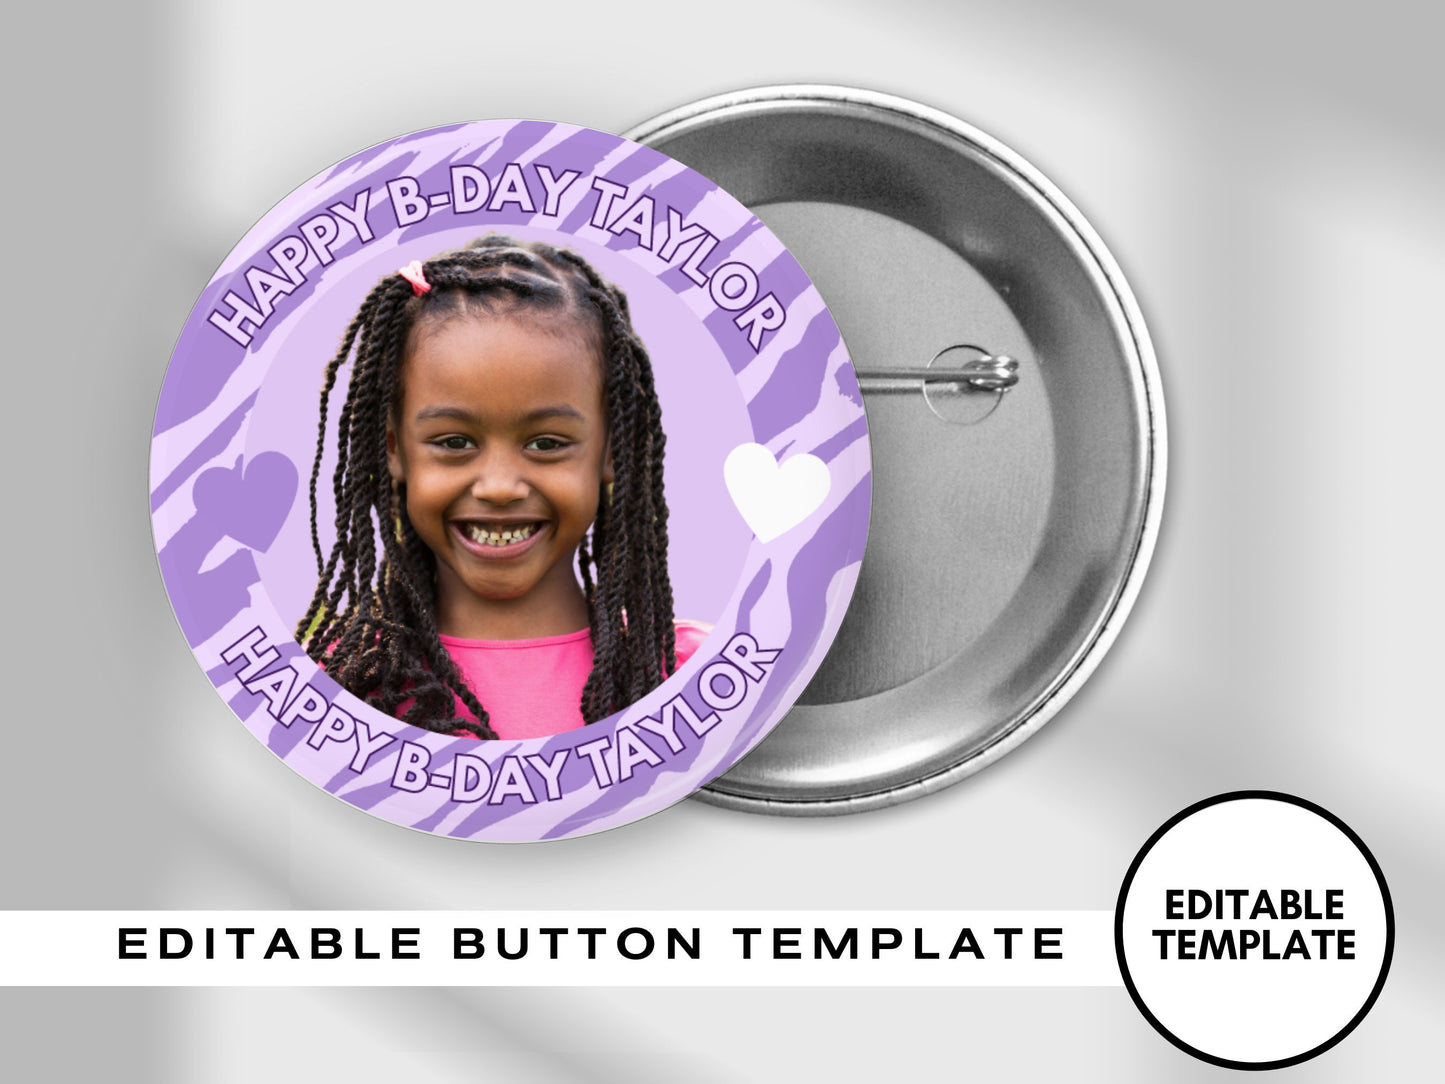 PURPLE BIRTHDAY PINBACK Template,Full Color| Personalized Funeral Buttons|Pinback Button Template|Keepsake Pin Backs Template